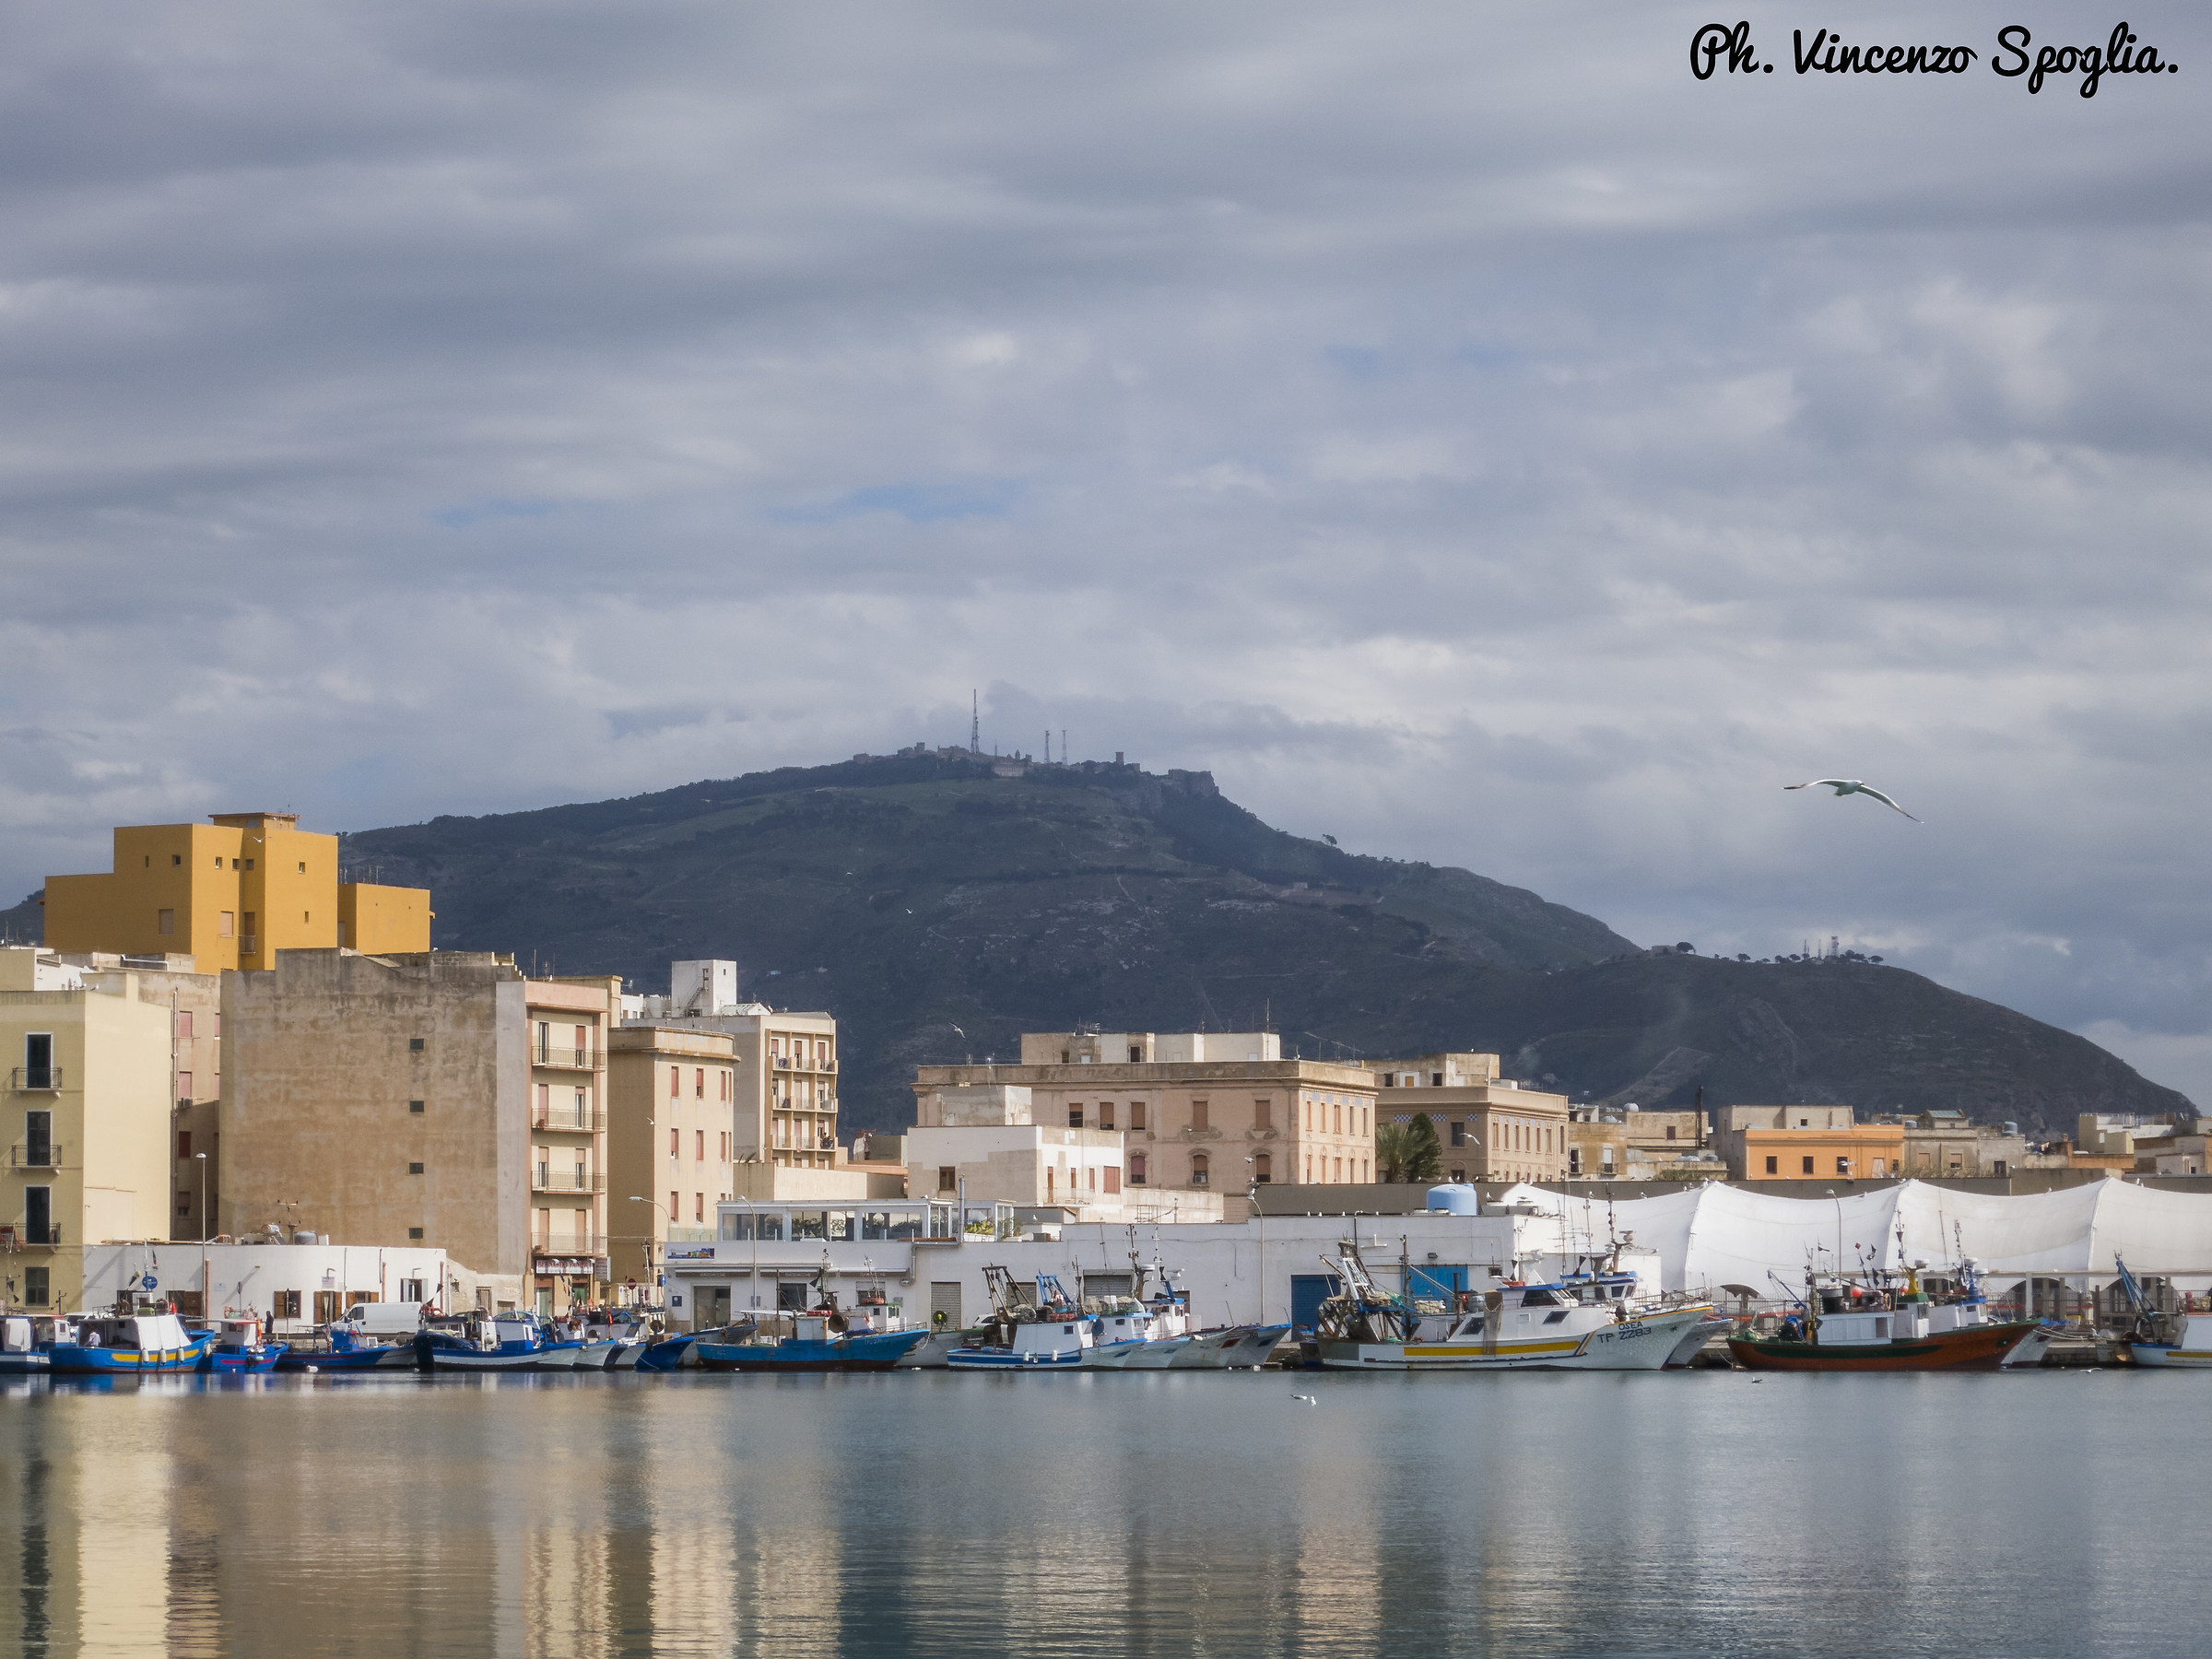 The mountain view from the harbor - Trapani...